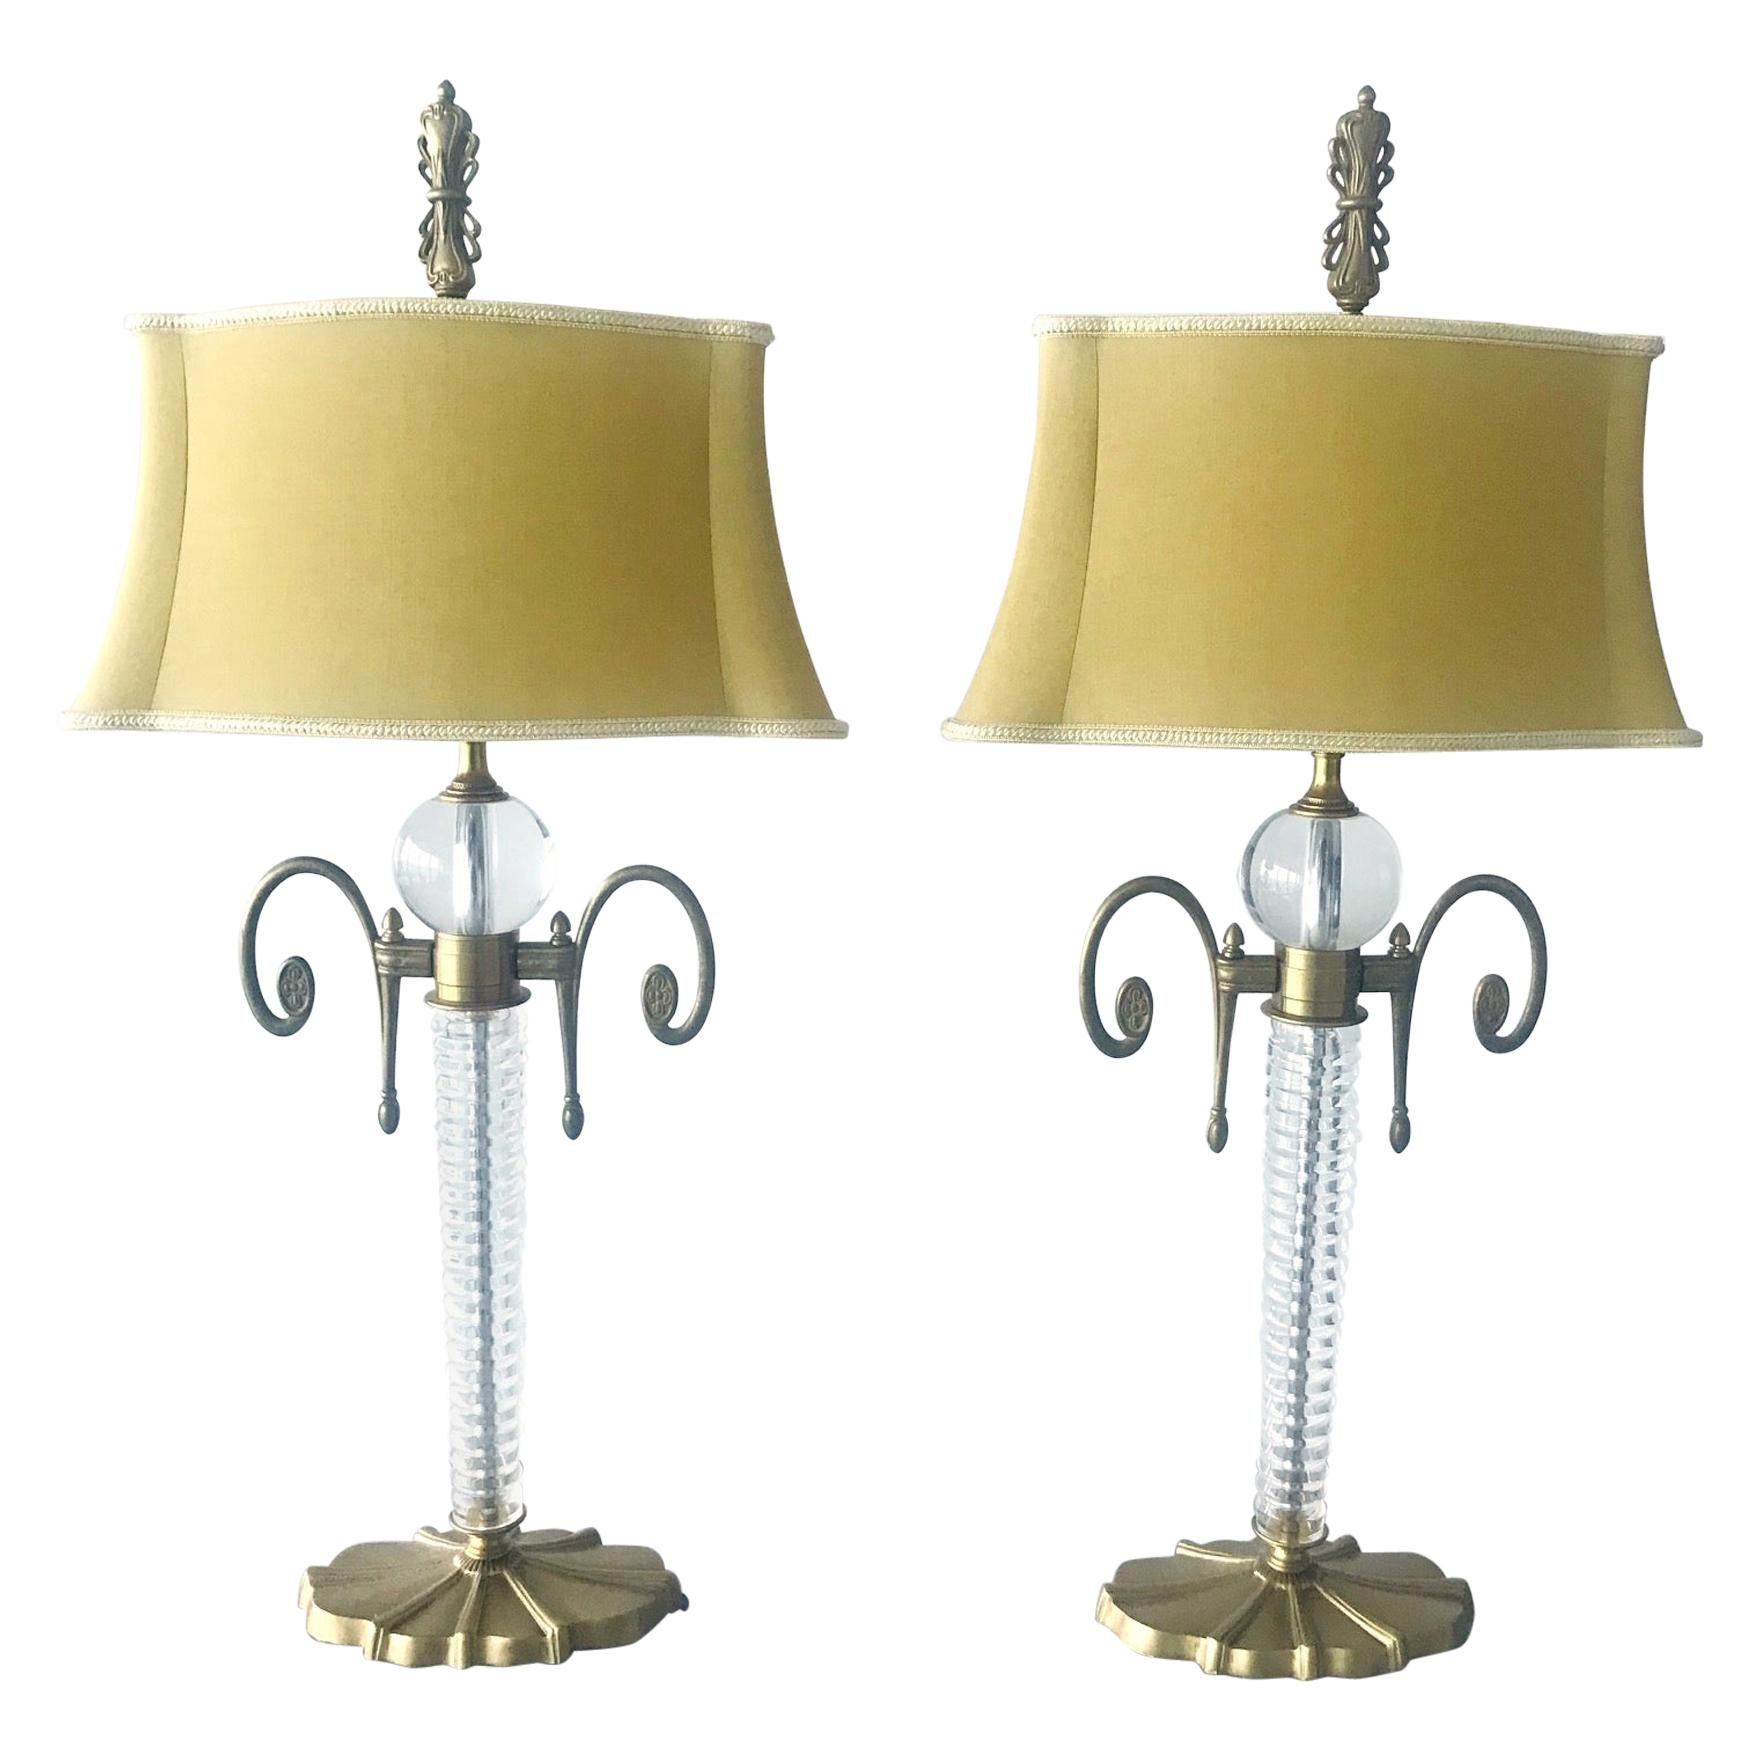 Pair of Exquisite Art Deco Glass and Gilded Brass Lamps